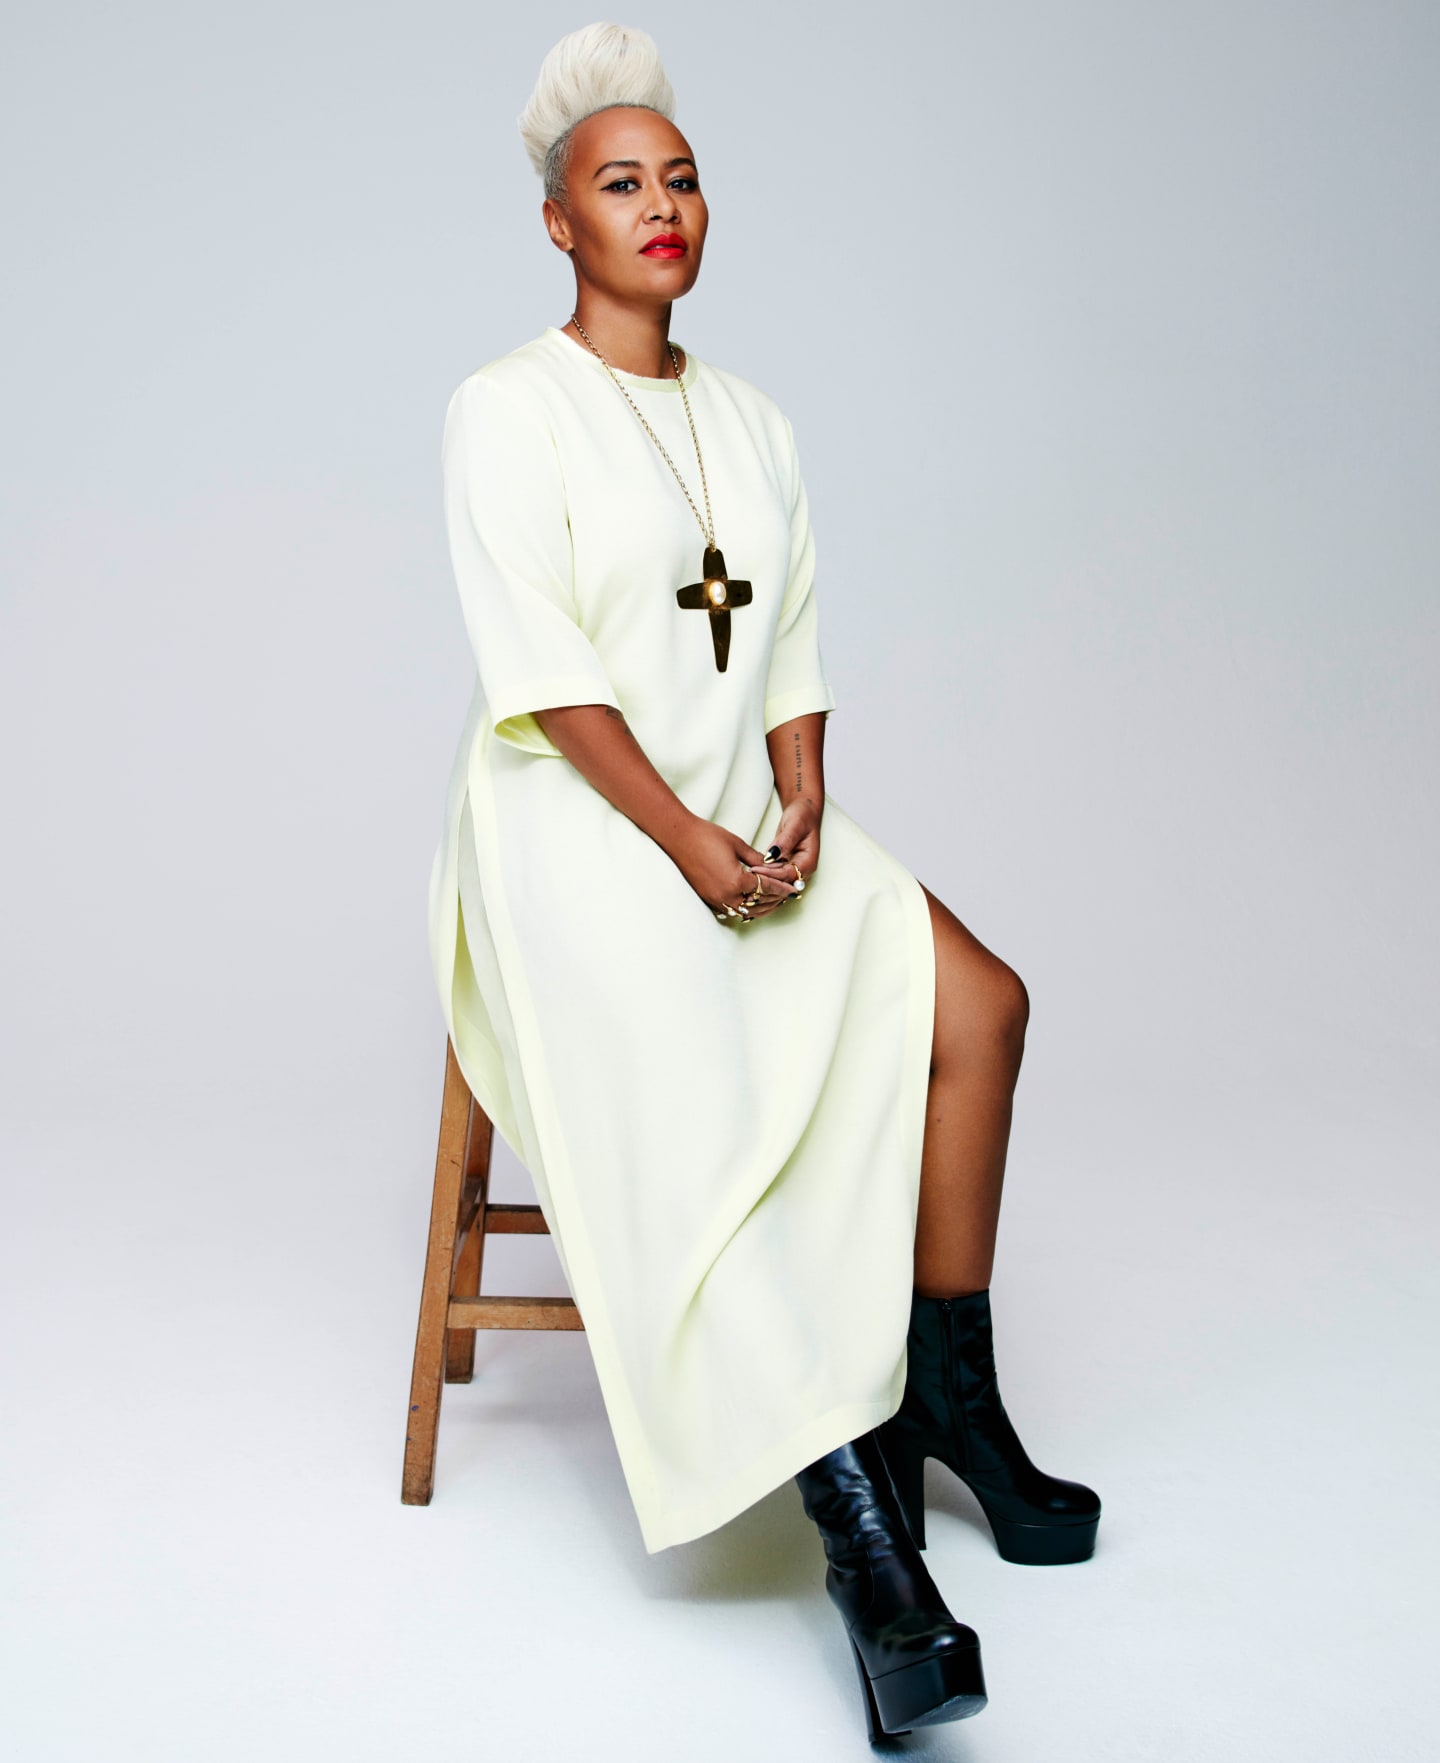 Emeli Sandé Learned How To Say No. The Result Is Her Best Music To Date.